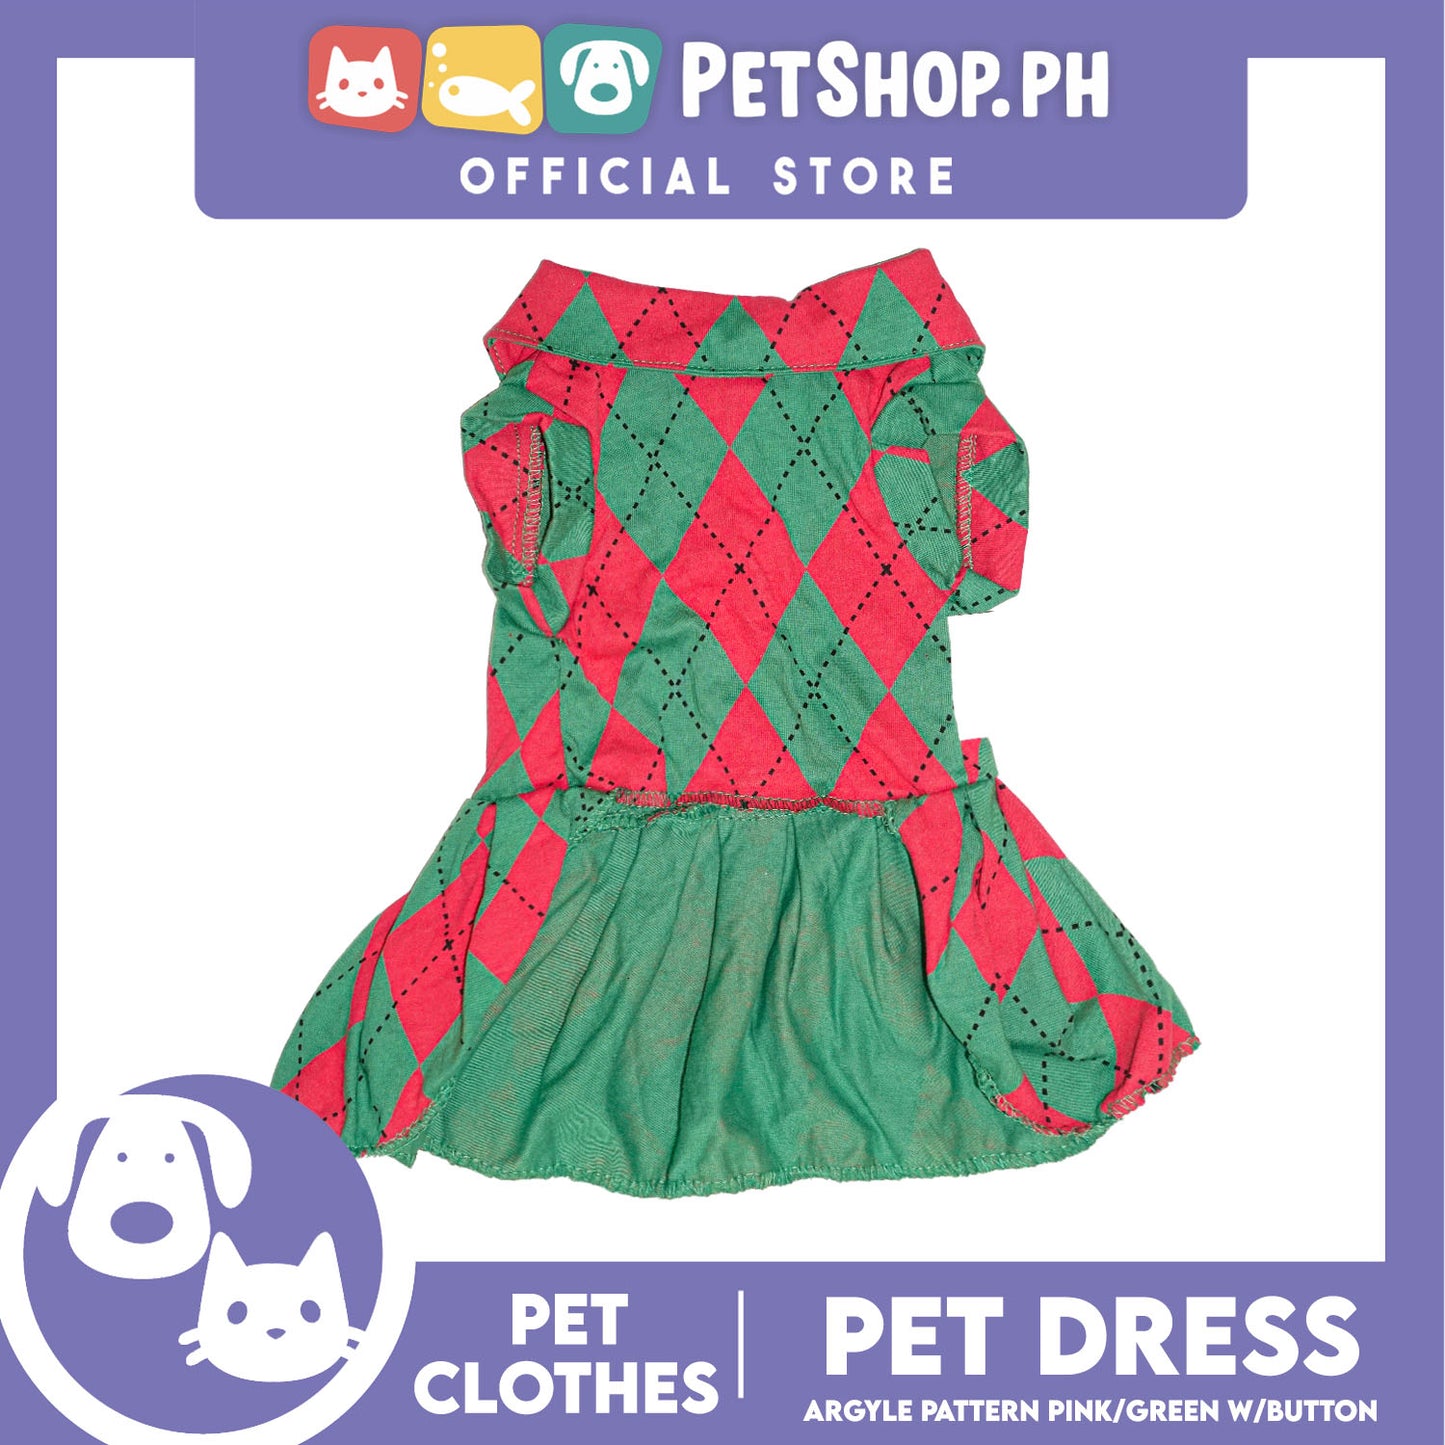 Pet Dress Argyle Pink/Green with Button Dress (Large) Perfect Fit for Dogs and Cats